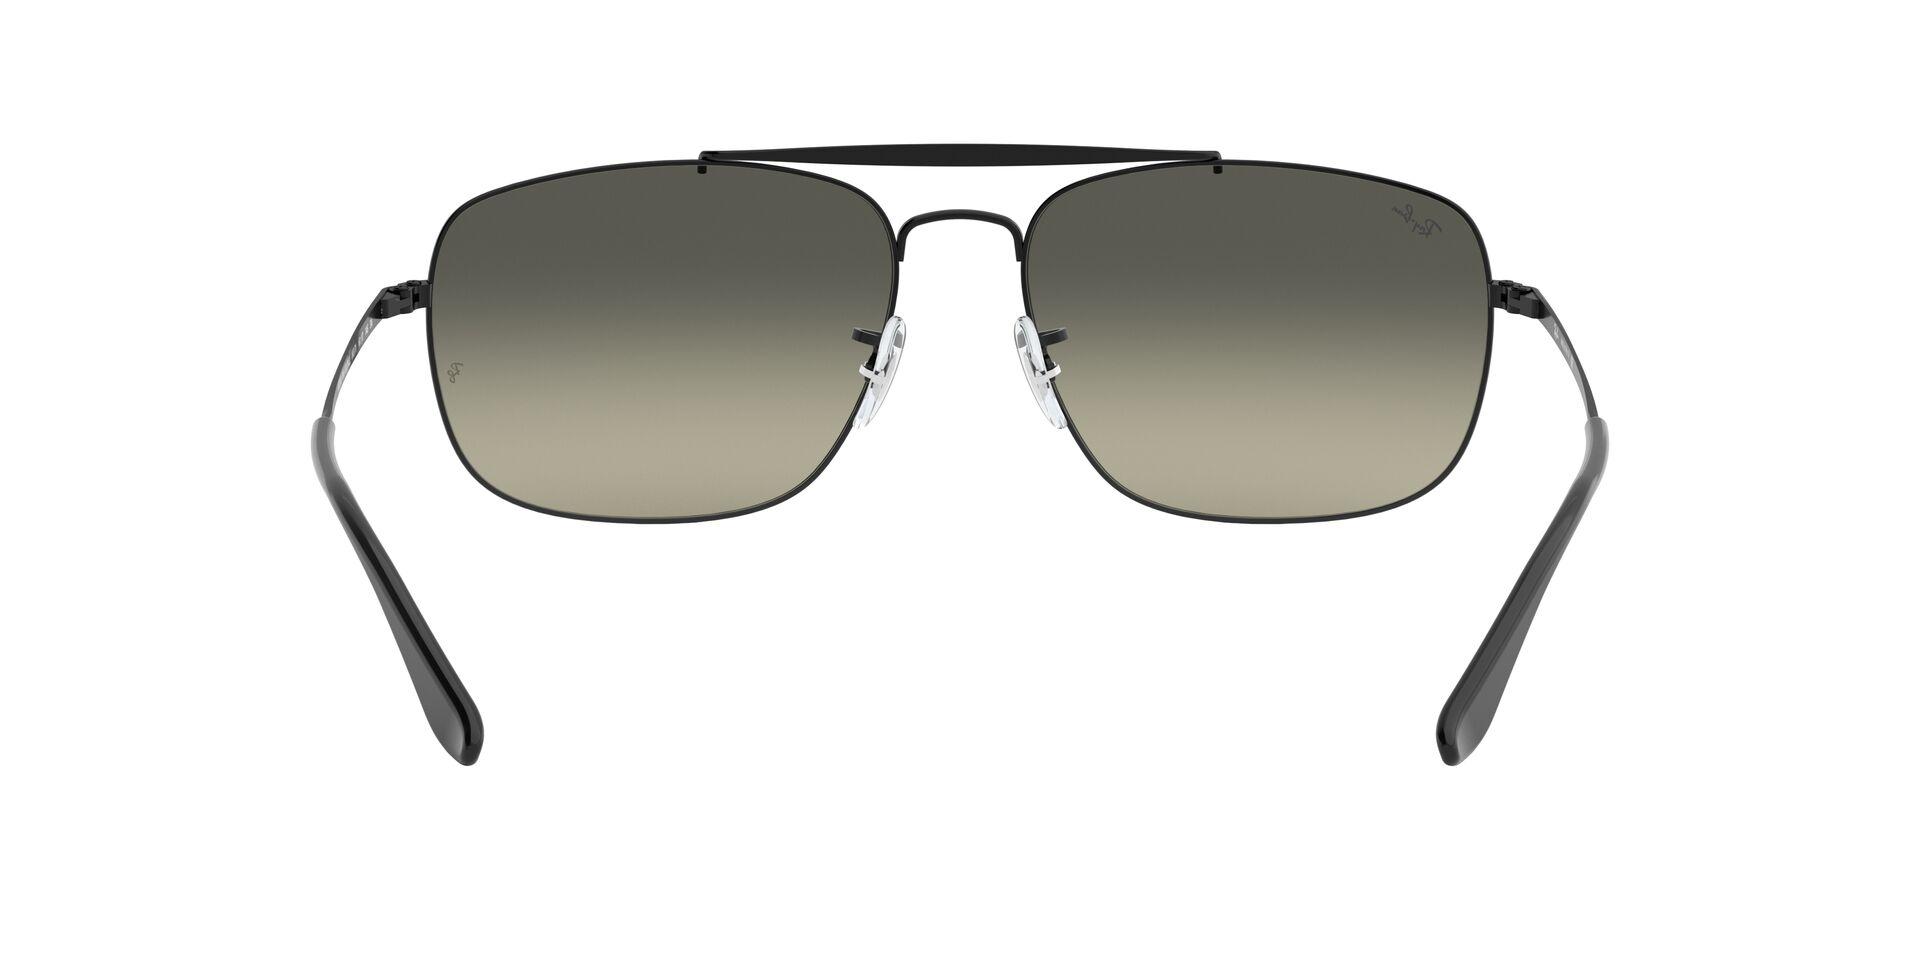 Mắt Kính Ray-Ban The Colonel - RB3560 002/71 -Sunglasses